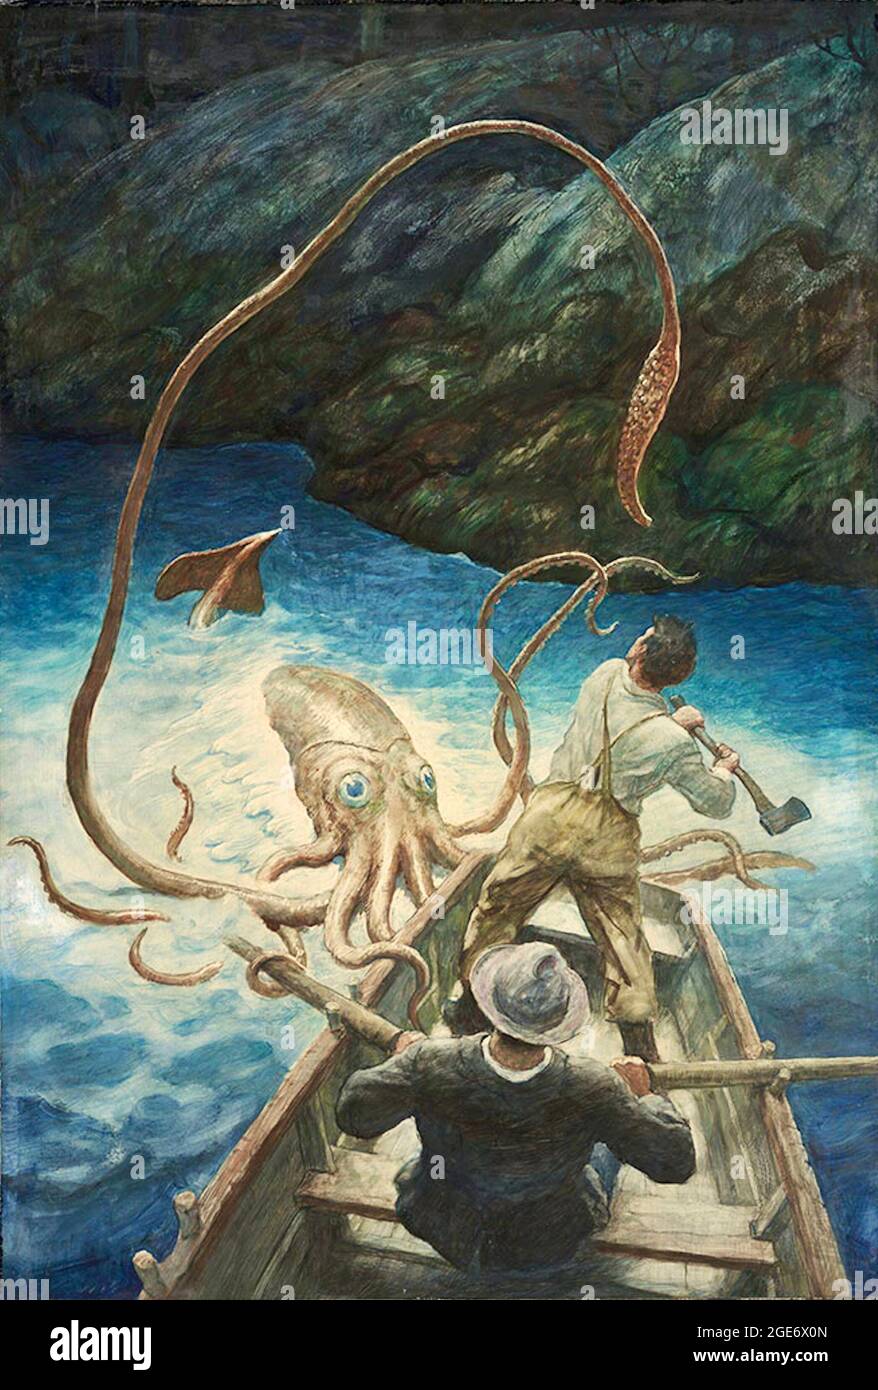 Newell Convers Wyeth ( N C Wyeth) artwork - The Adventures of the Giant Squid - 1939 - Giant octopus attacks men on a rowing boat. Stock Photo